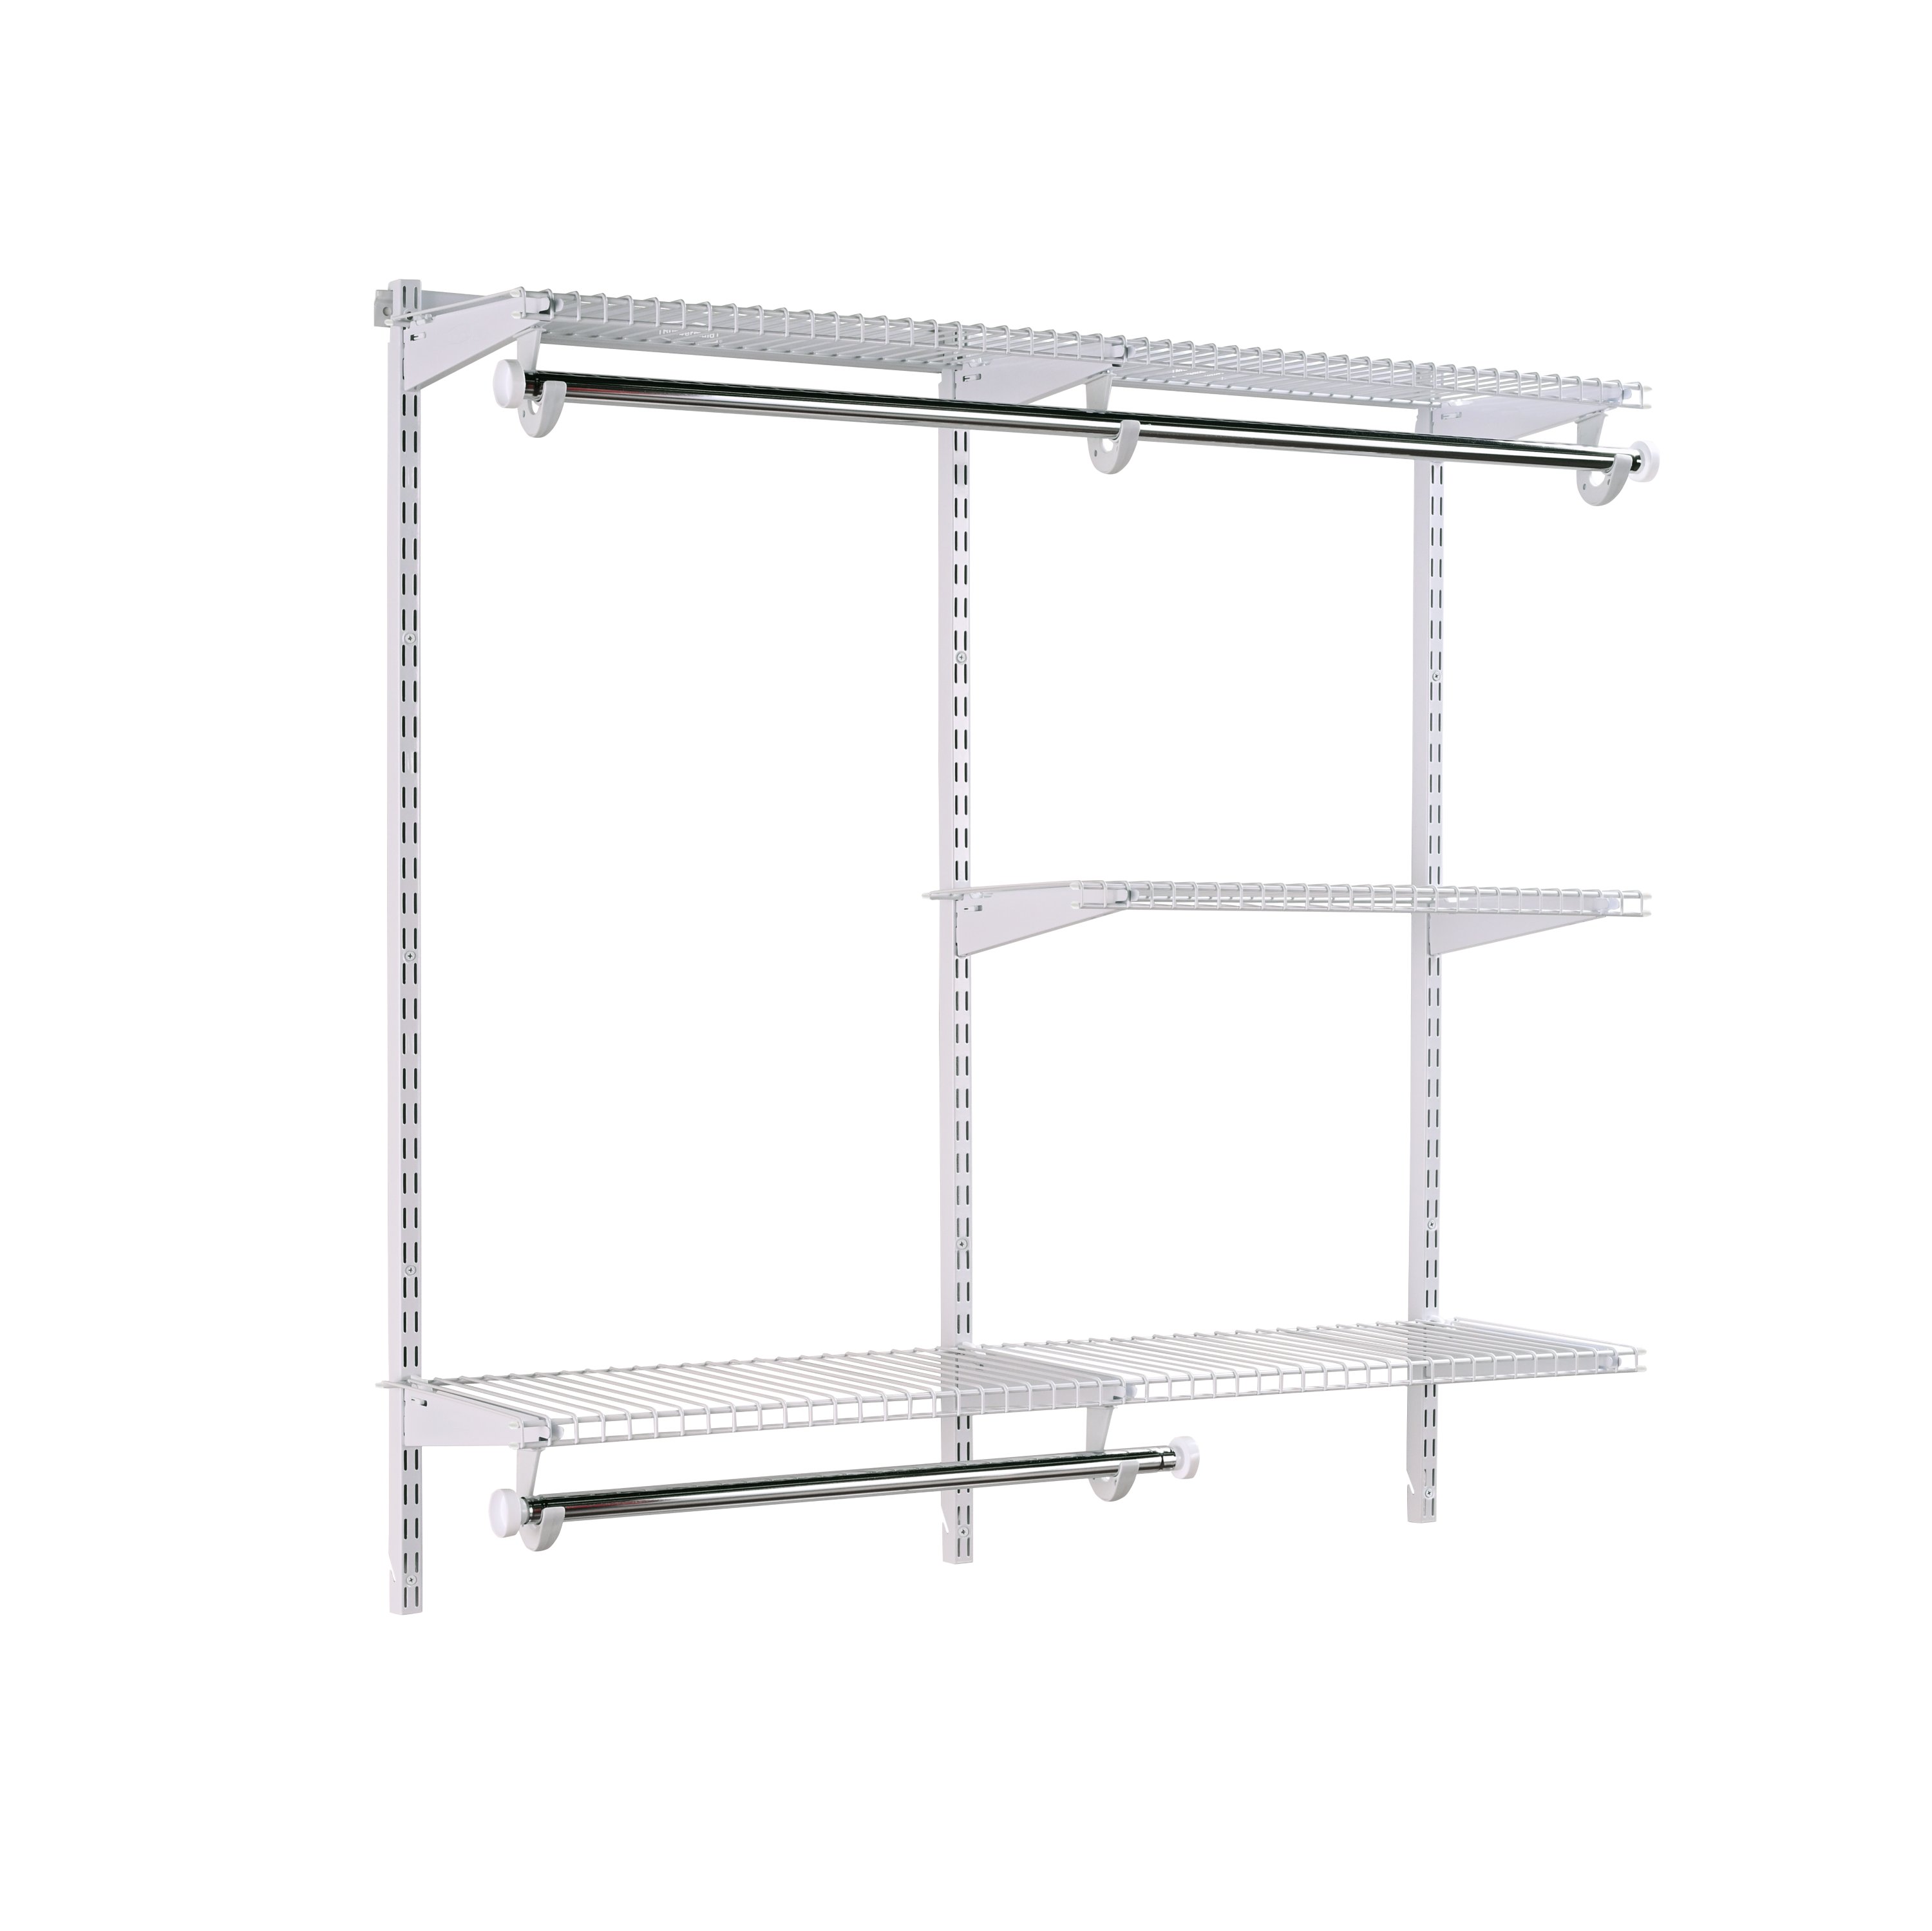 Rubbermaid Classic Custom 3 to 6 Foot Wide Walk In or Reach In Closet  Shelving and Hanging Storage Configuration Kit, White